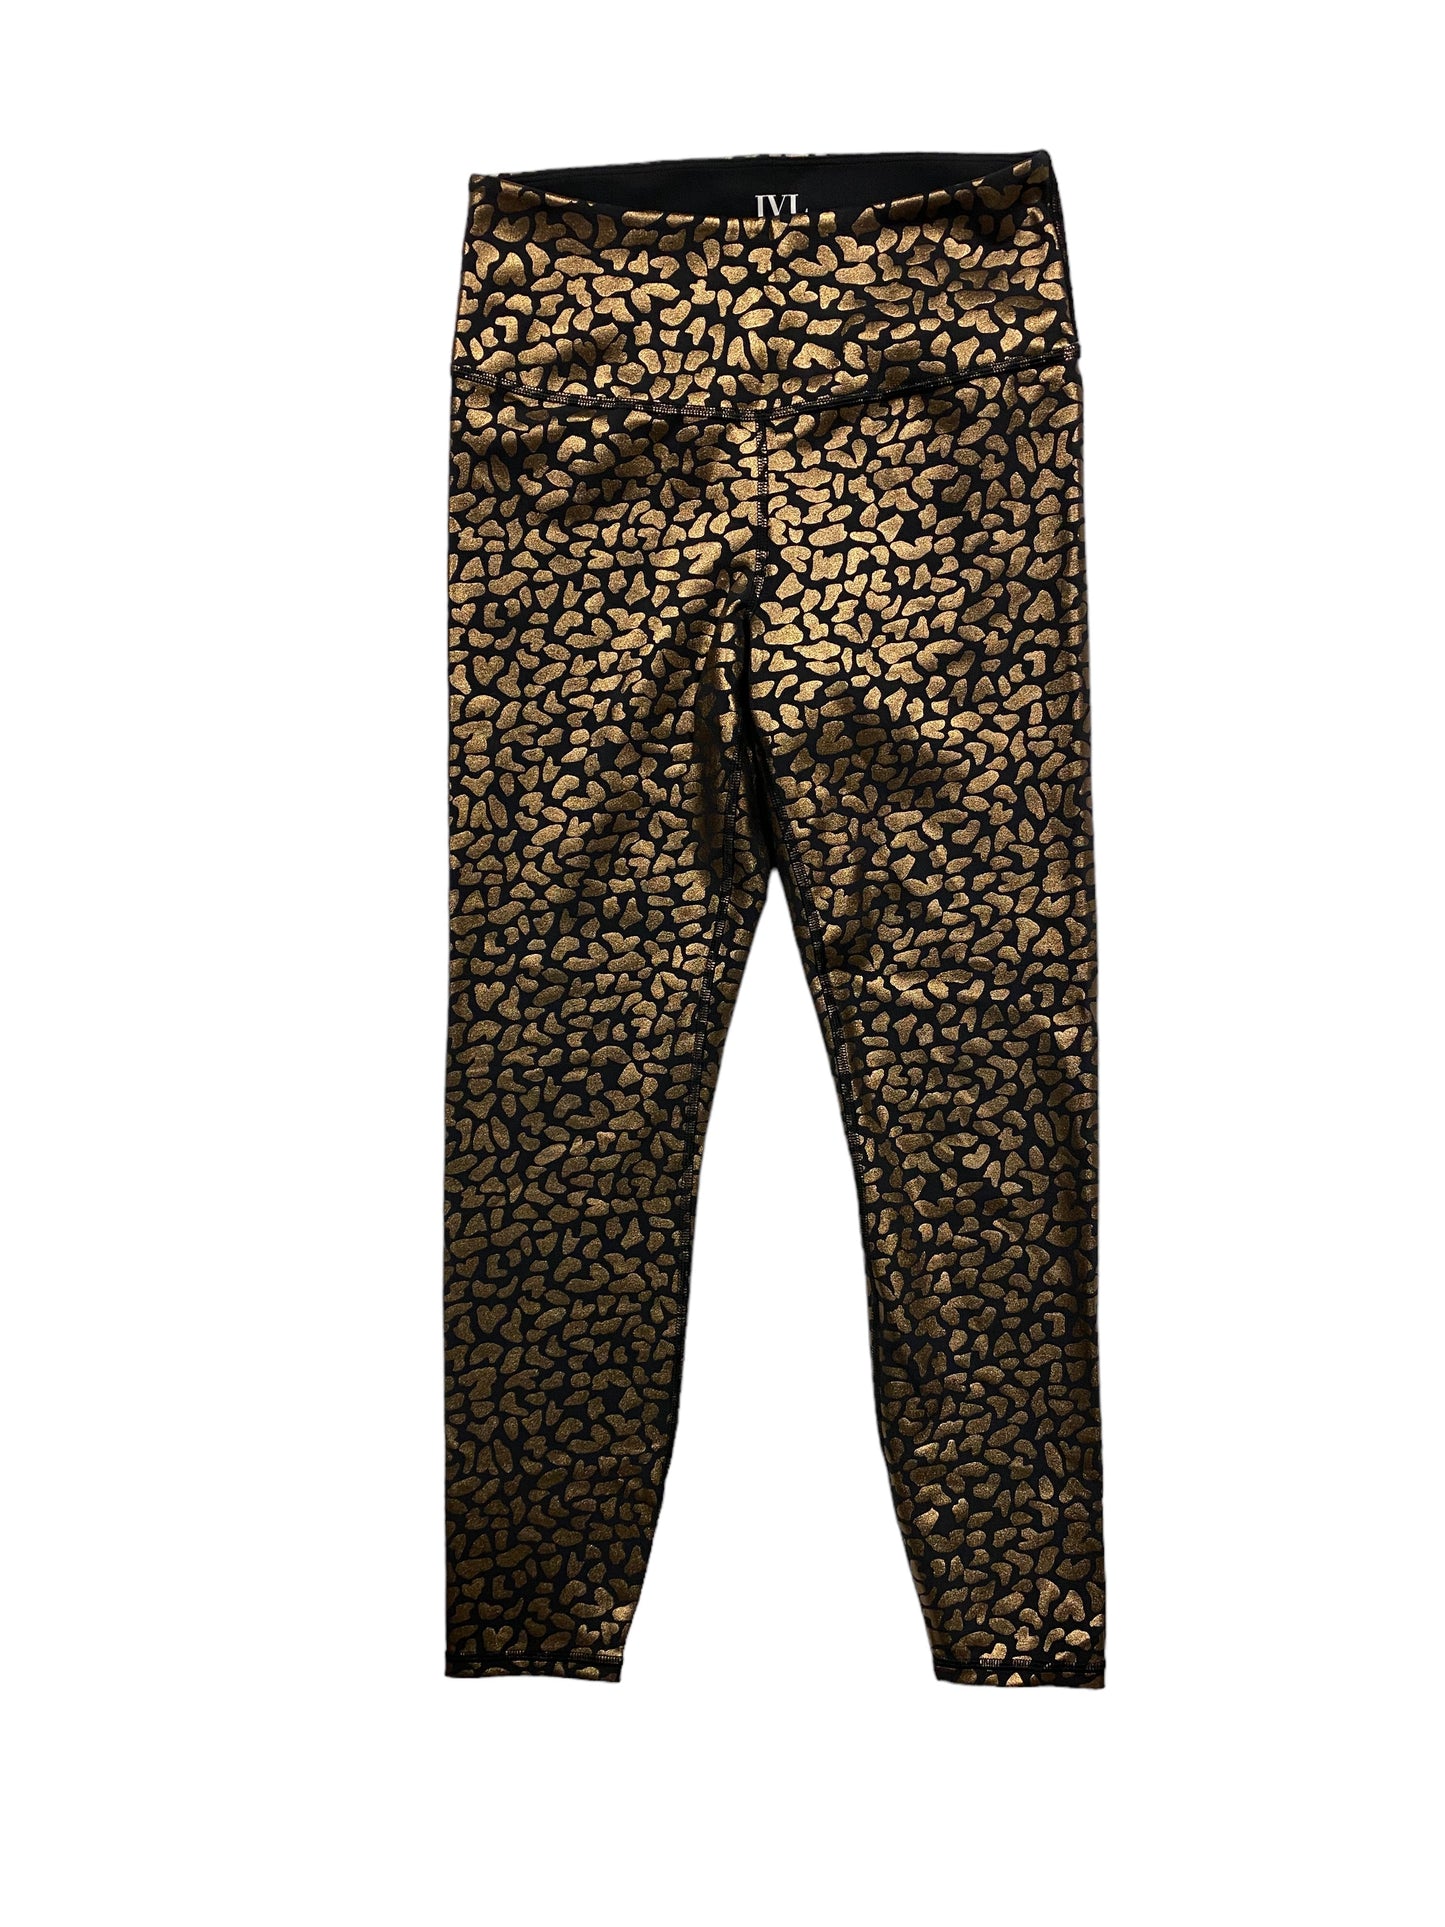 Animal Print Athletic Leggings Ivl Collective, Size 6